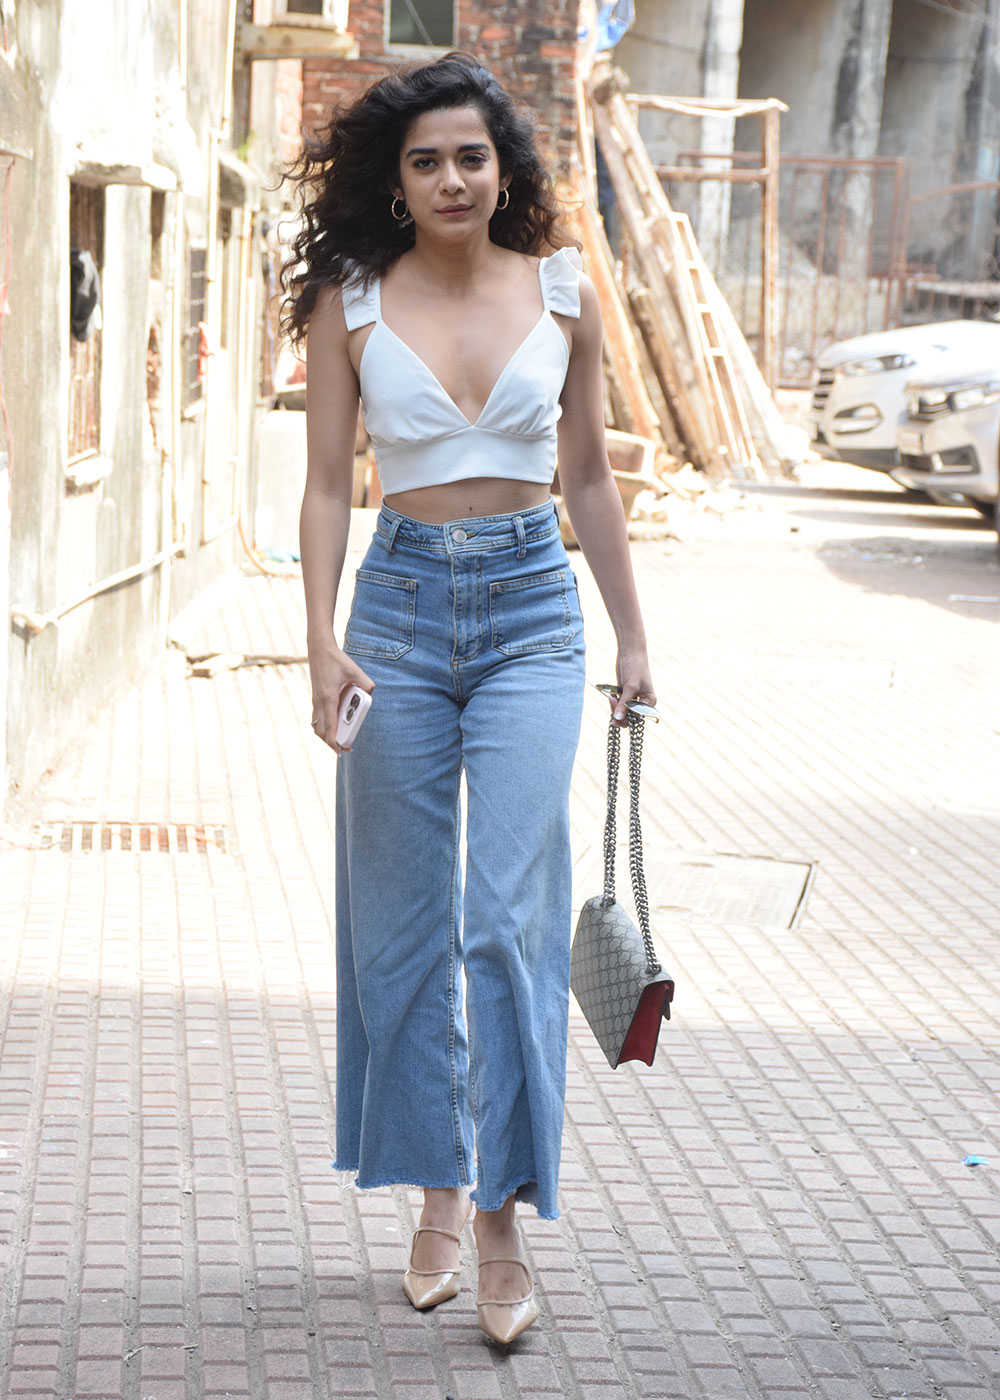 Mithila Palkar Slaying the Fashion Game in Recent Pictures